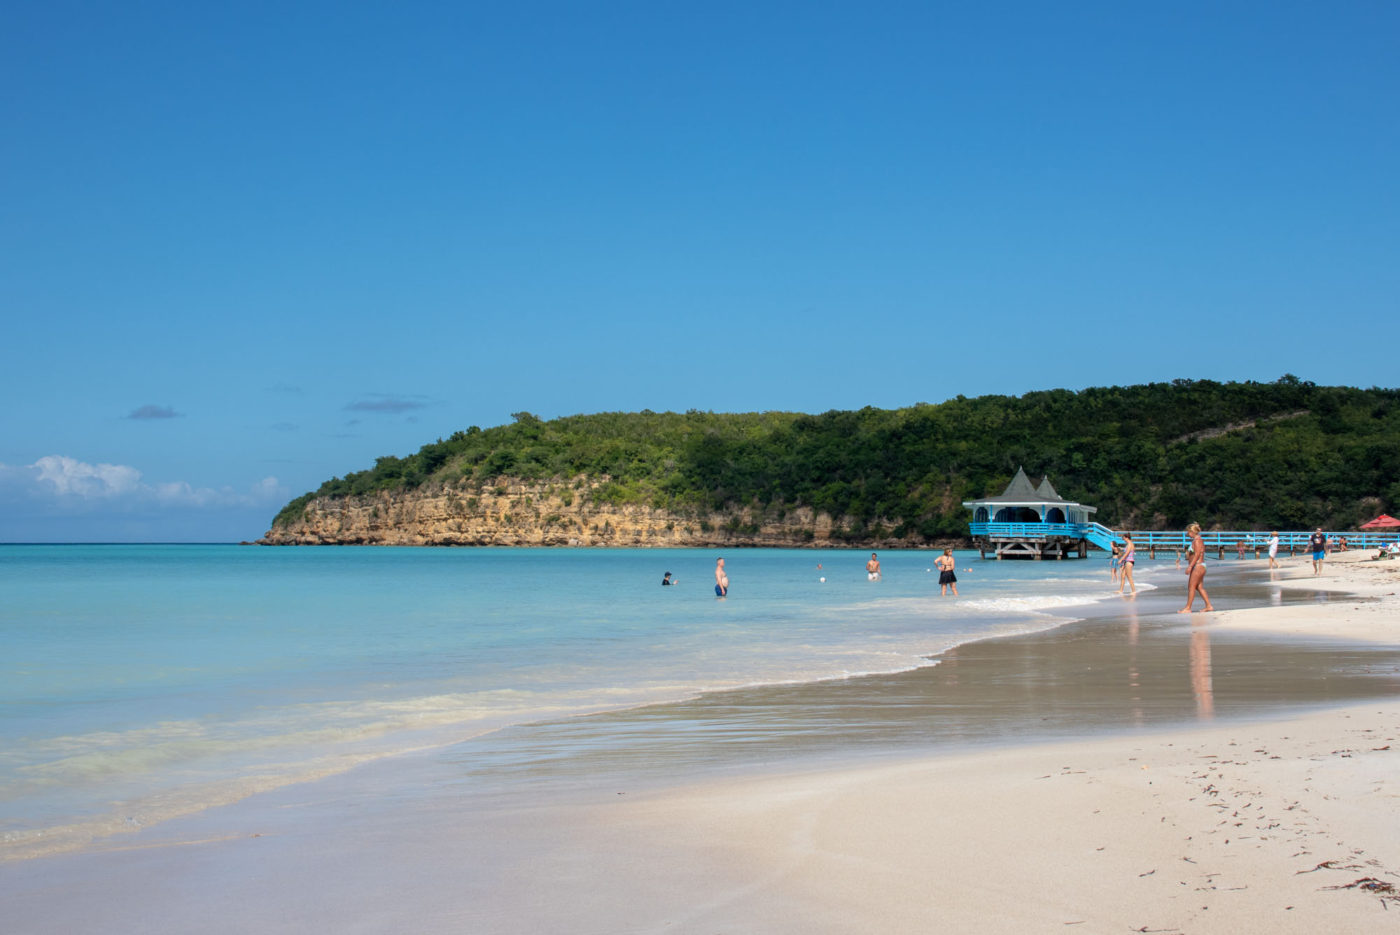 Antigua and Barbuda Attractions – The Caribbean Jewel of 365 Beaches